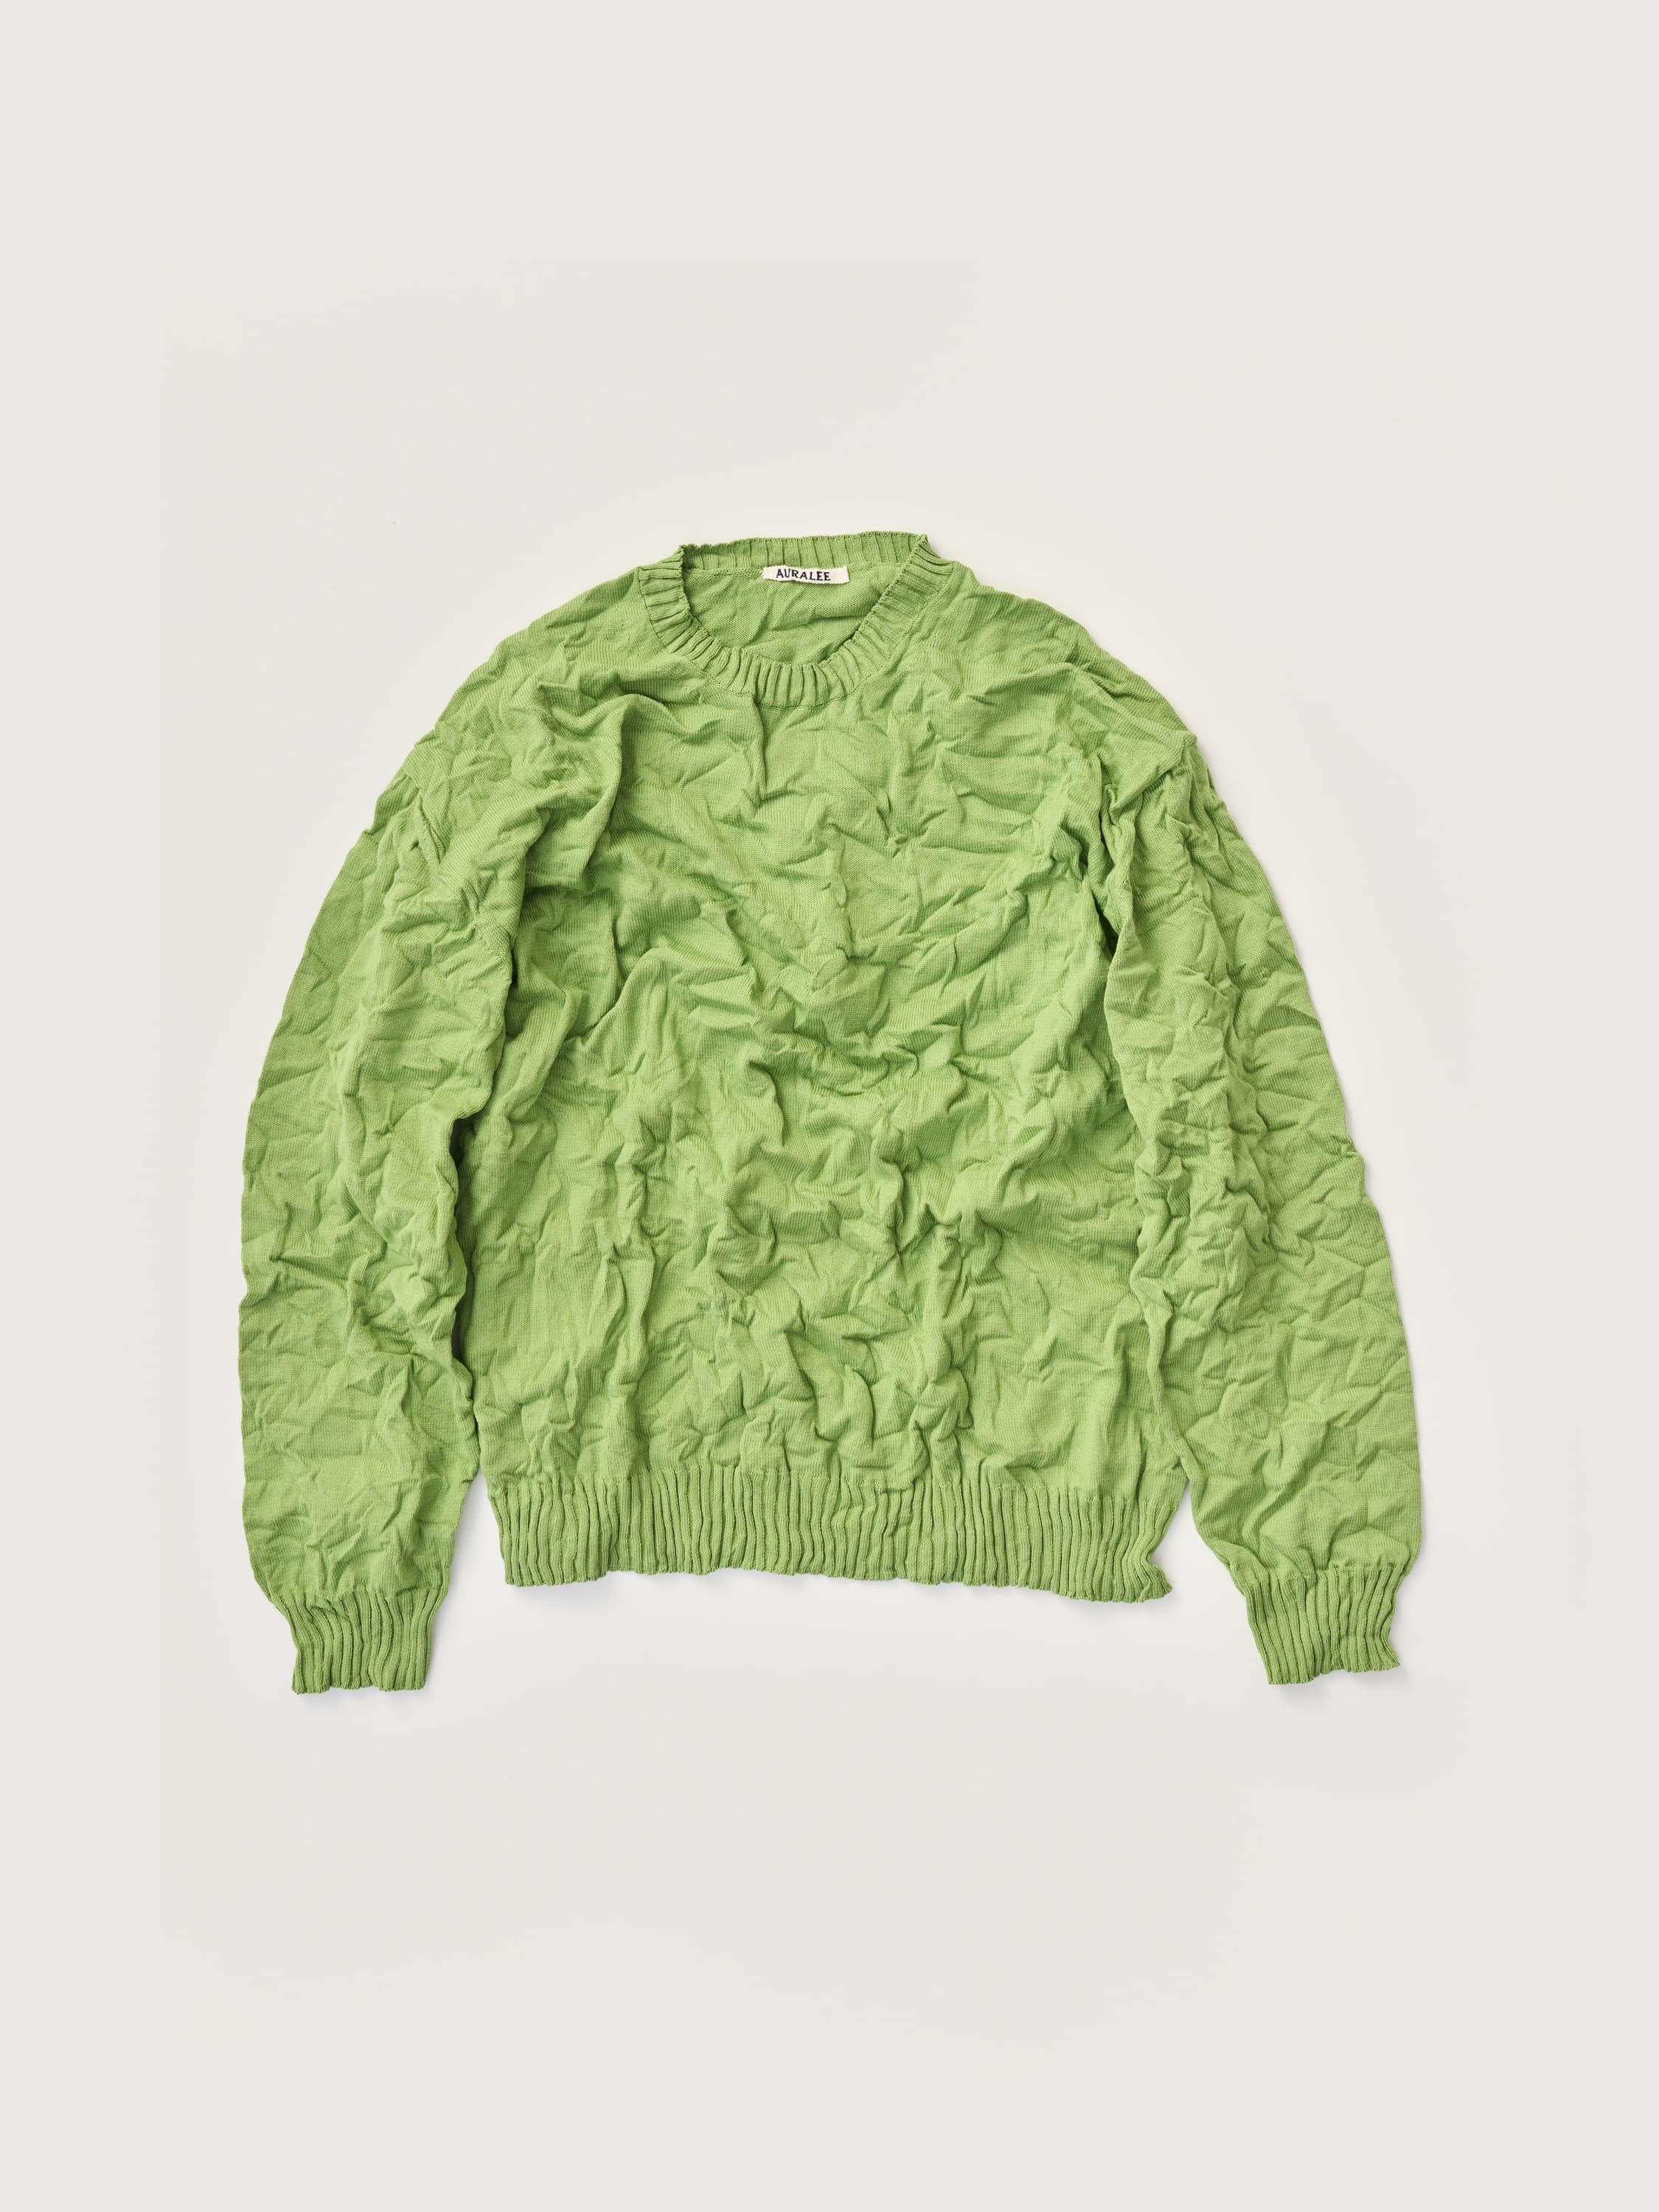 WRINKLED DRY COTTON KNIT P/O